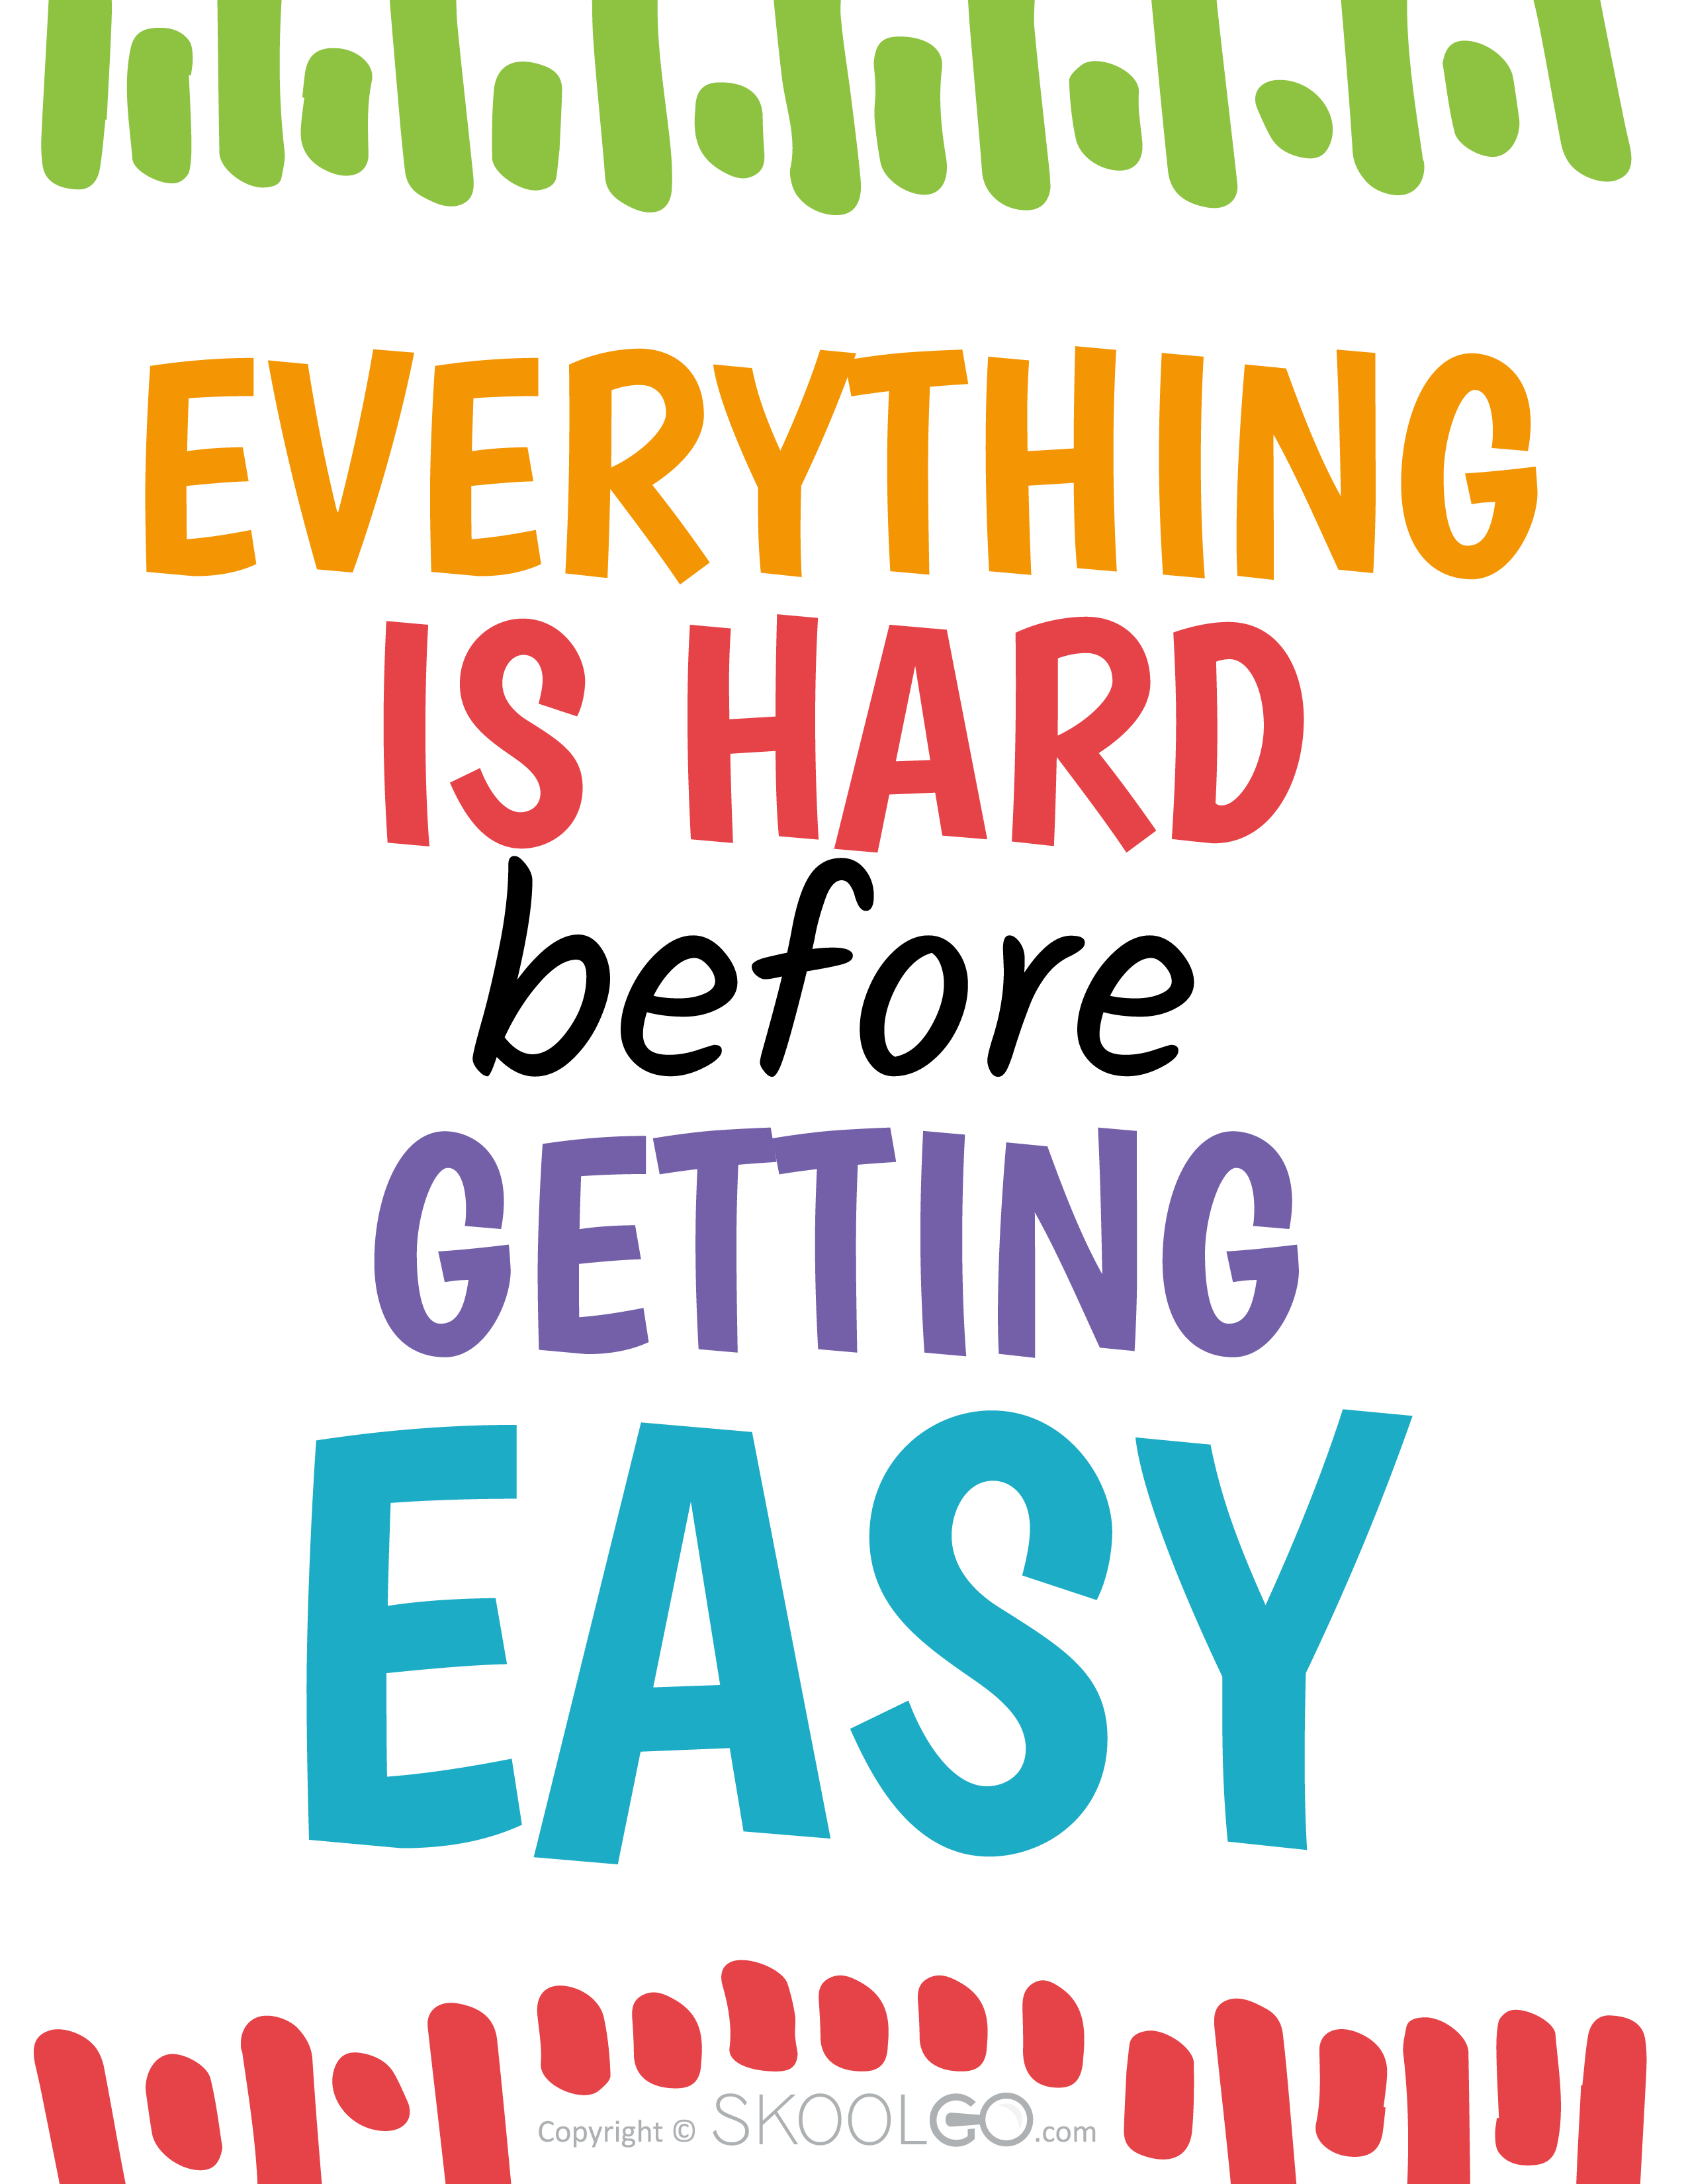 Everything Is Hard Before Getting Easy - Free Poster